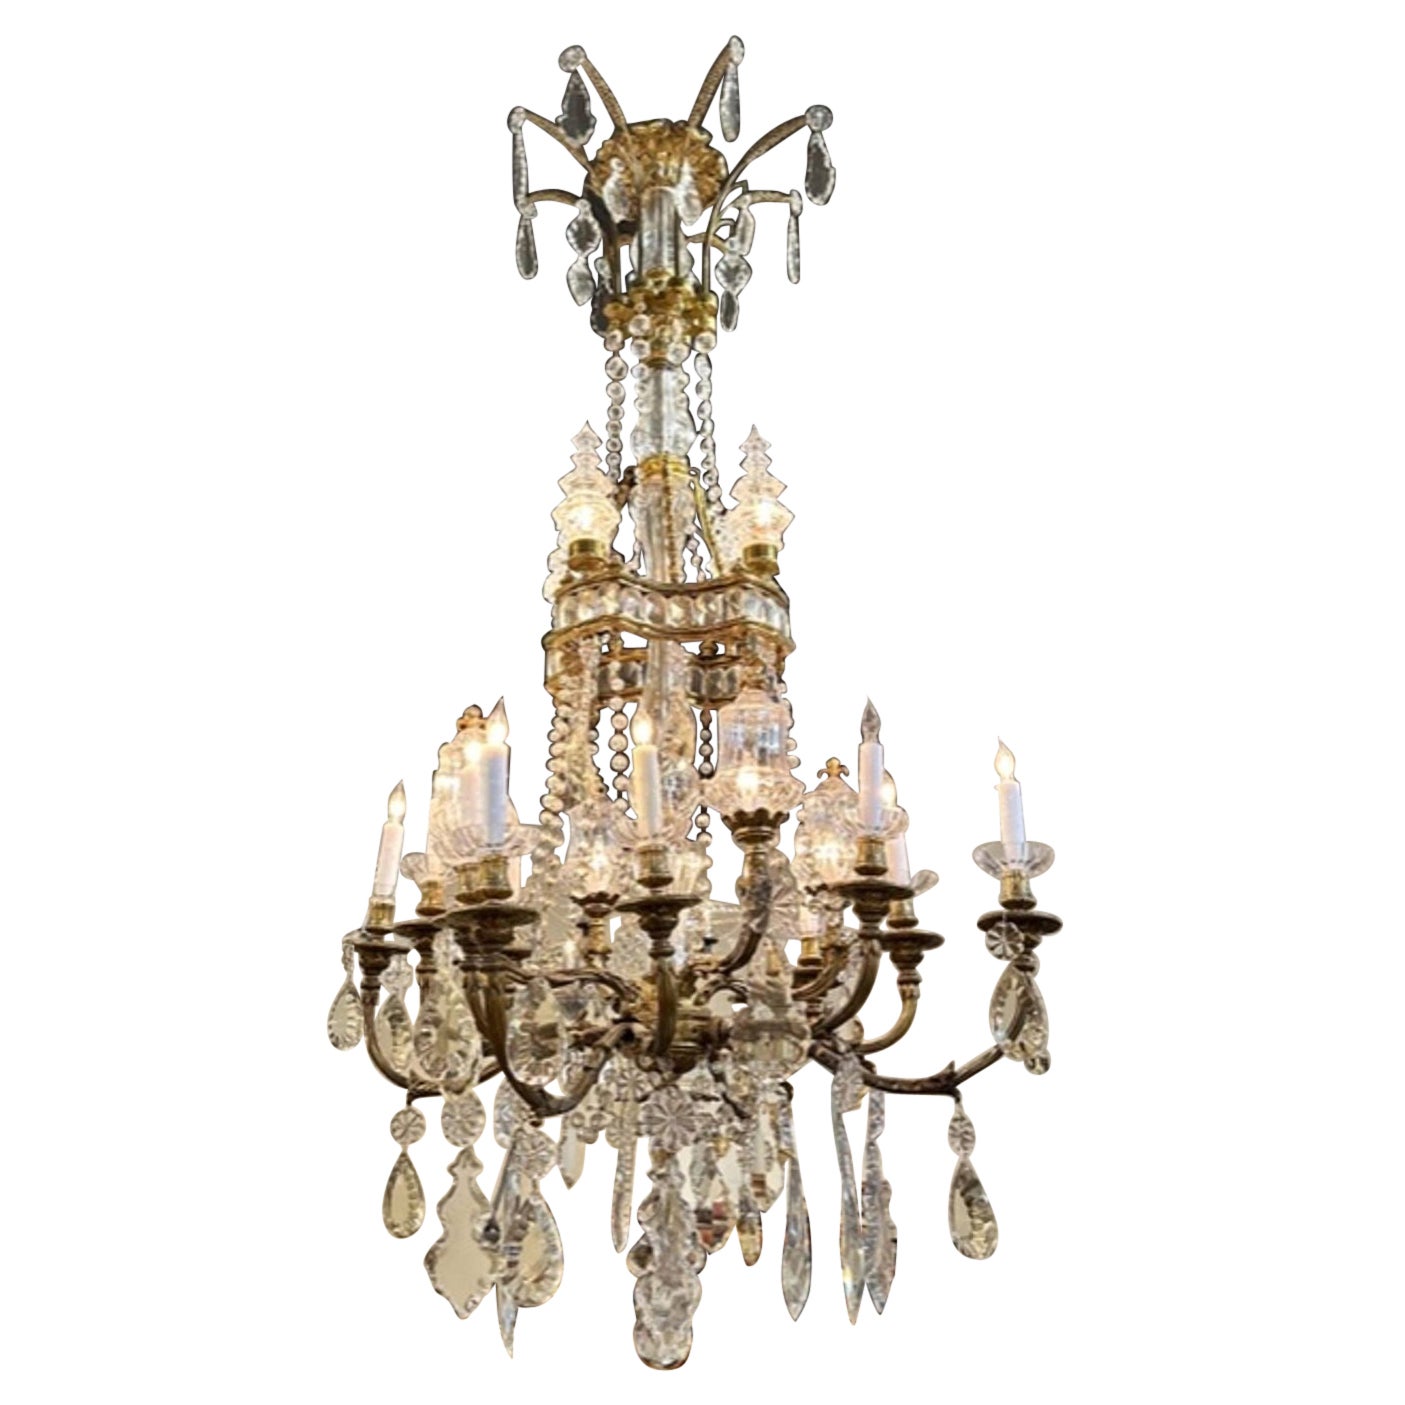 19th Century Large Scale English Gilt Bronze and Crystal Chandelier For Sale